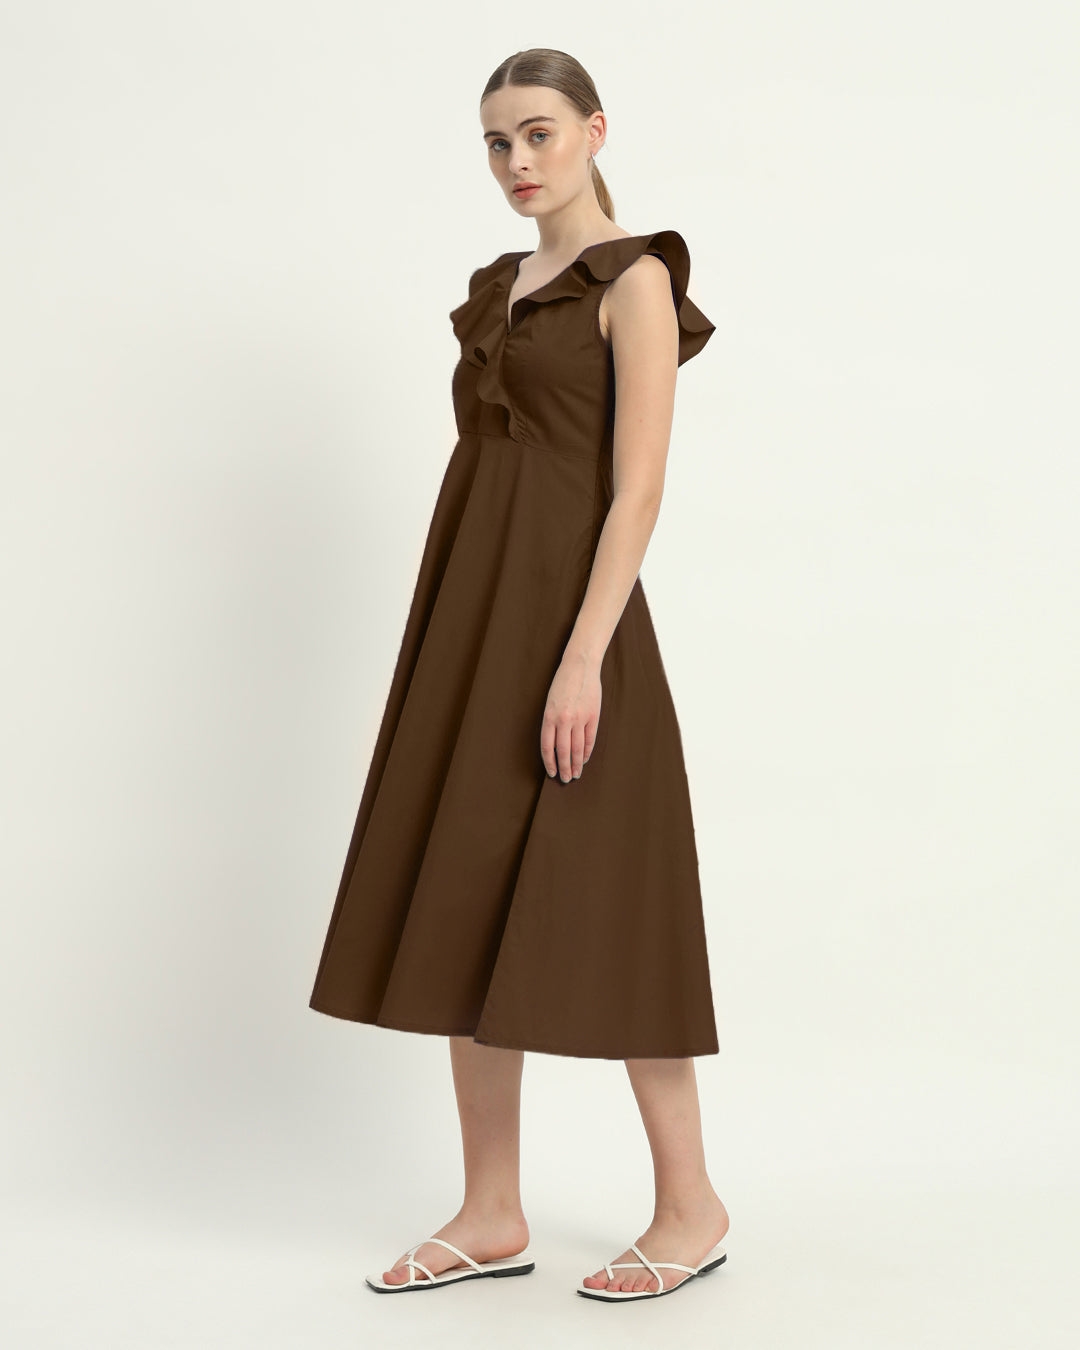 The Nutshell Albany Cotton Dress